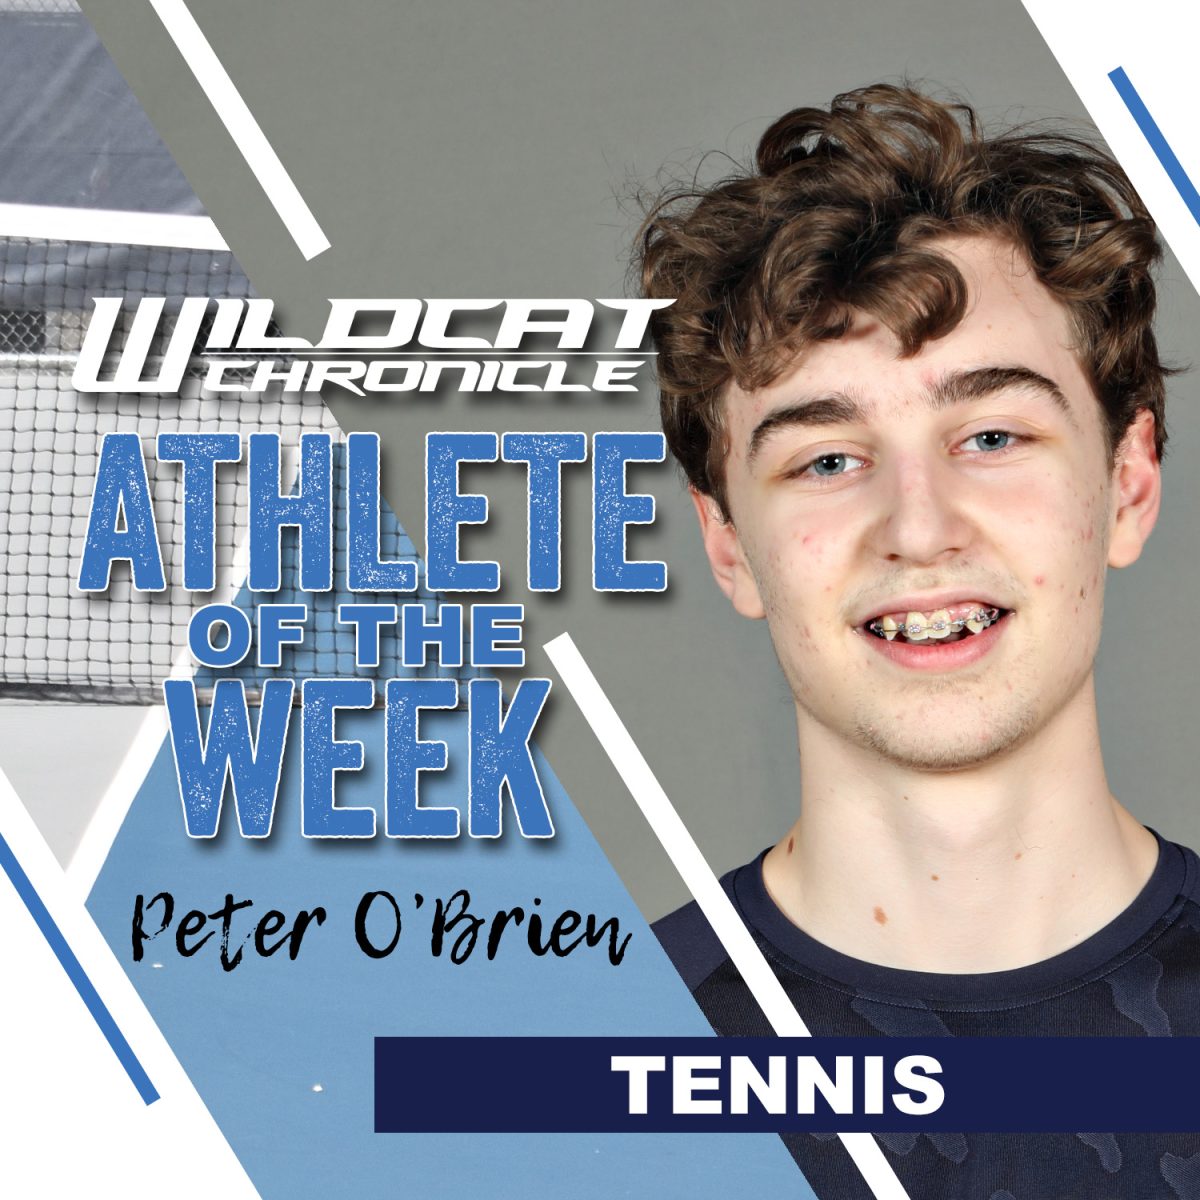 APRIL+7-12%3A+Sophomore+Peter+OBrien+is+this+weeks+pick+for+Athlete+of+the+Week.+According+to+Coach+Madden%2C+%E2%80%9CPeter+has+played+a+critical+role+for+the+Wildcat+tennis+team+this+year.+He+serves+as+one+of+our+captains+and+is+on+our+1st+Doubles+team%21+He+consistently+puts+effort+into+getting+better+and+has+been+a+great+teammate+for+the+squad+and+with+his+doubles+partner+as+well%21+Nice+work+Peter%21%E2%80%9D+%28Photo+illustration+created+by+Wildcat+Chronicle+Staff+using+images+by+Chris+Pena+and+Lifetouch%29